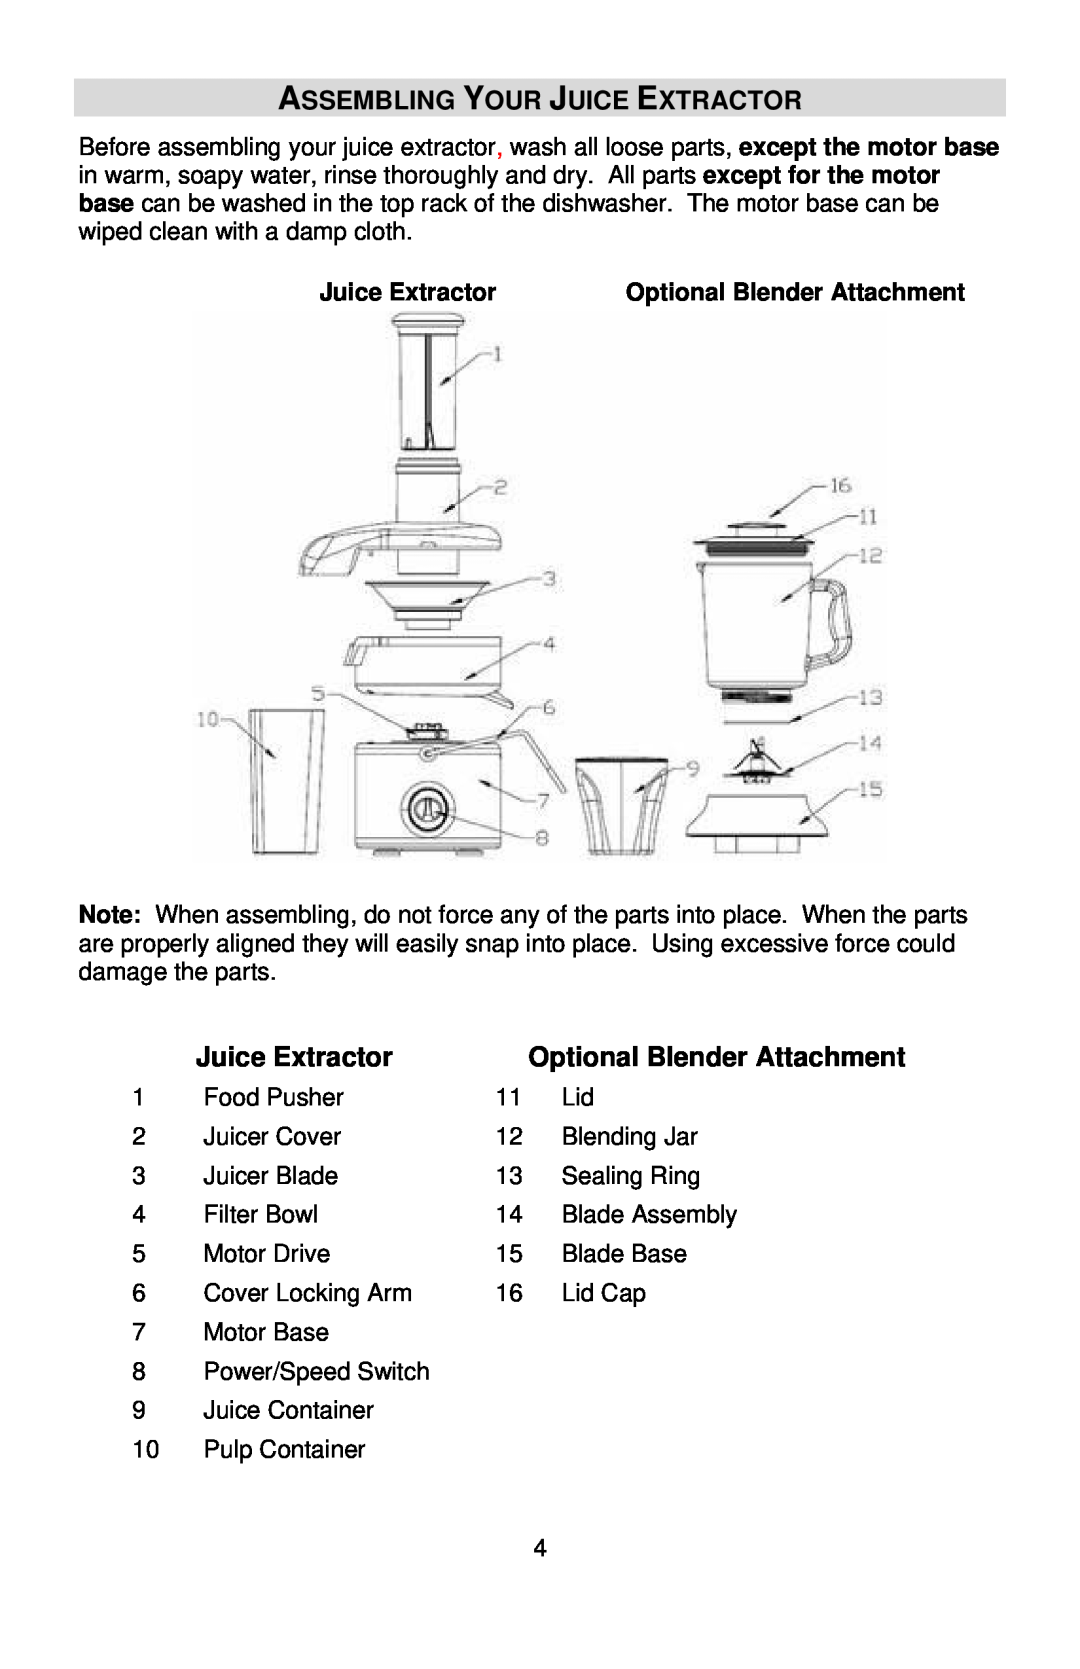 West Bend 7000CF, L5760 instruction manual Assembling Your Juice Extractor, Optional Blender Attachment 